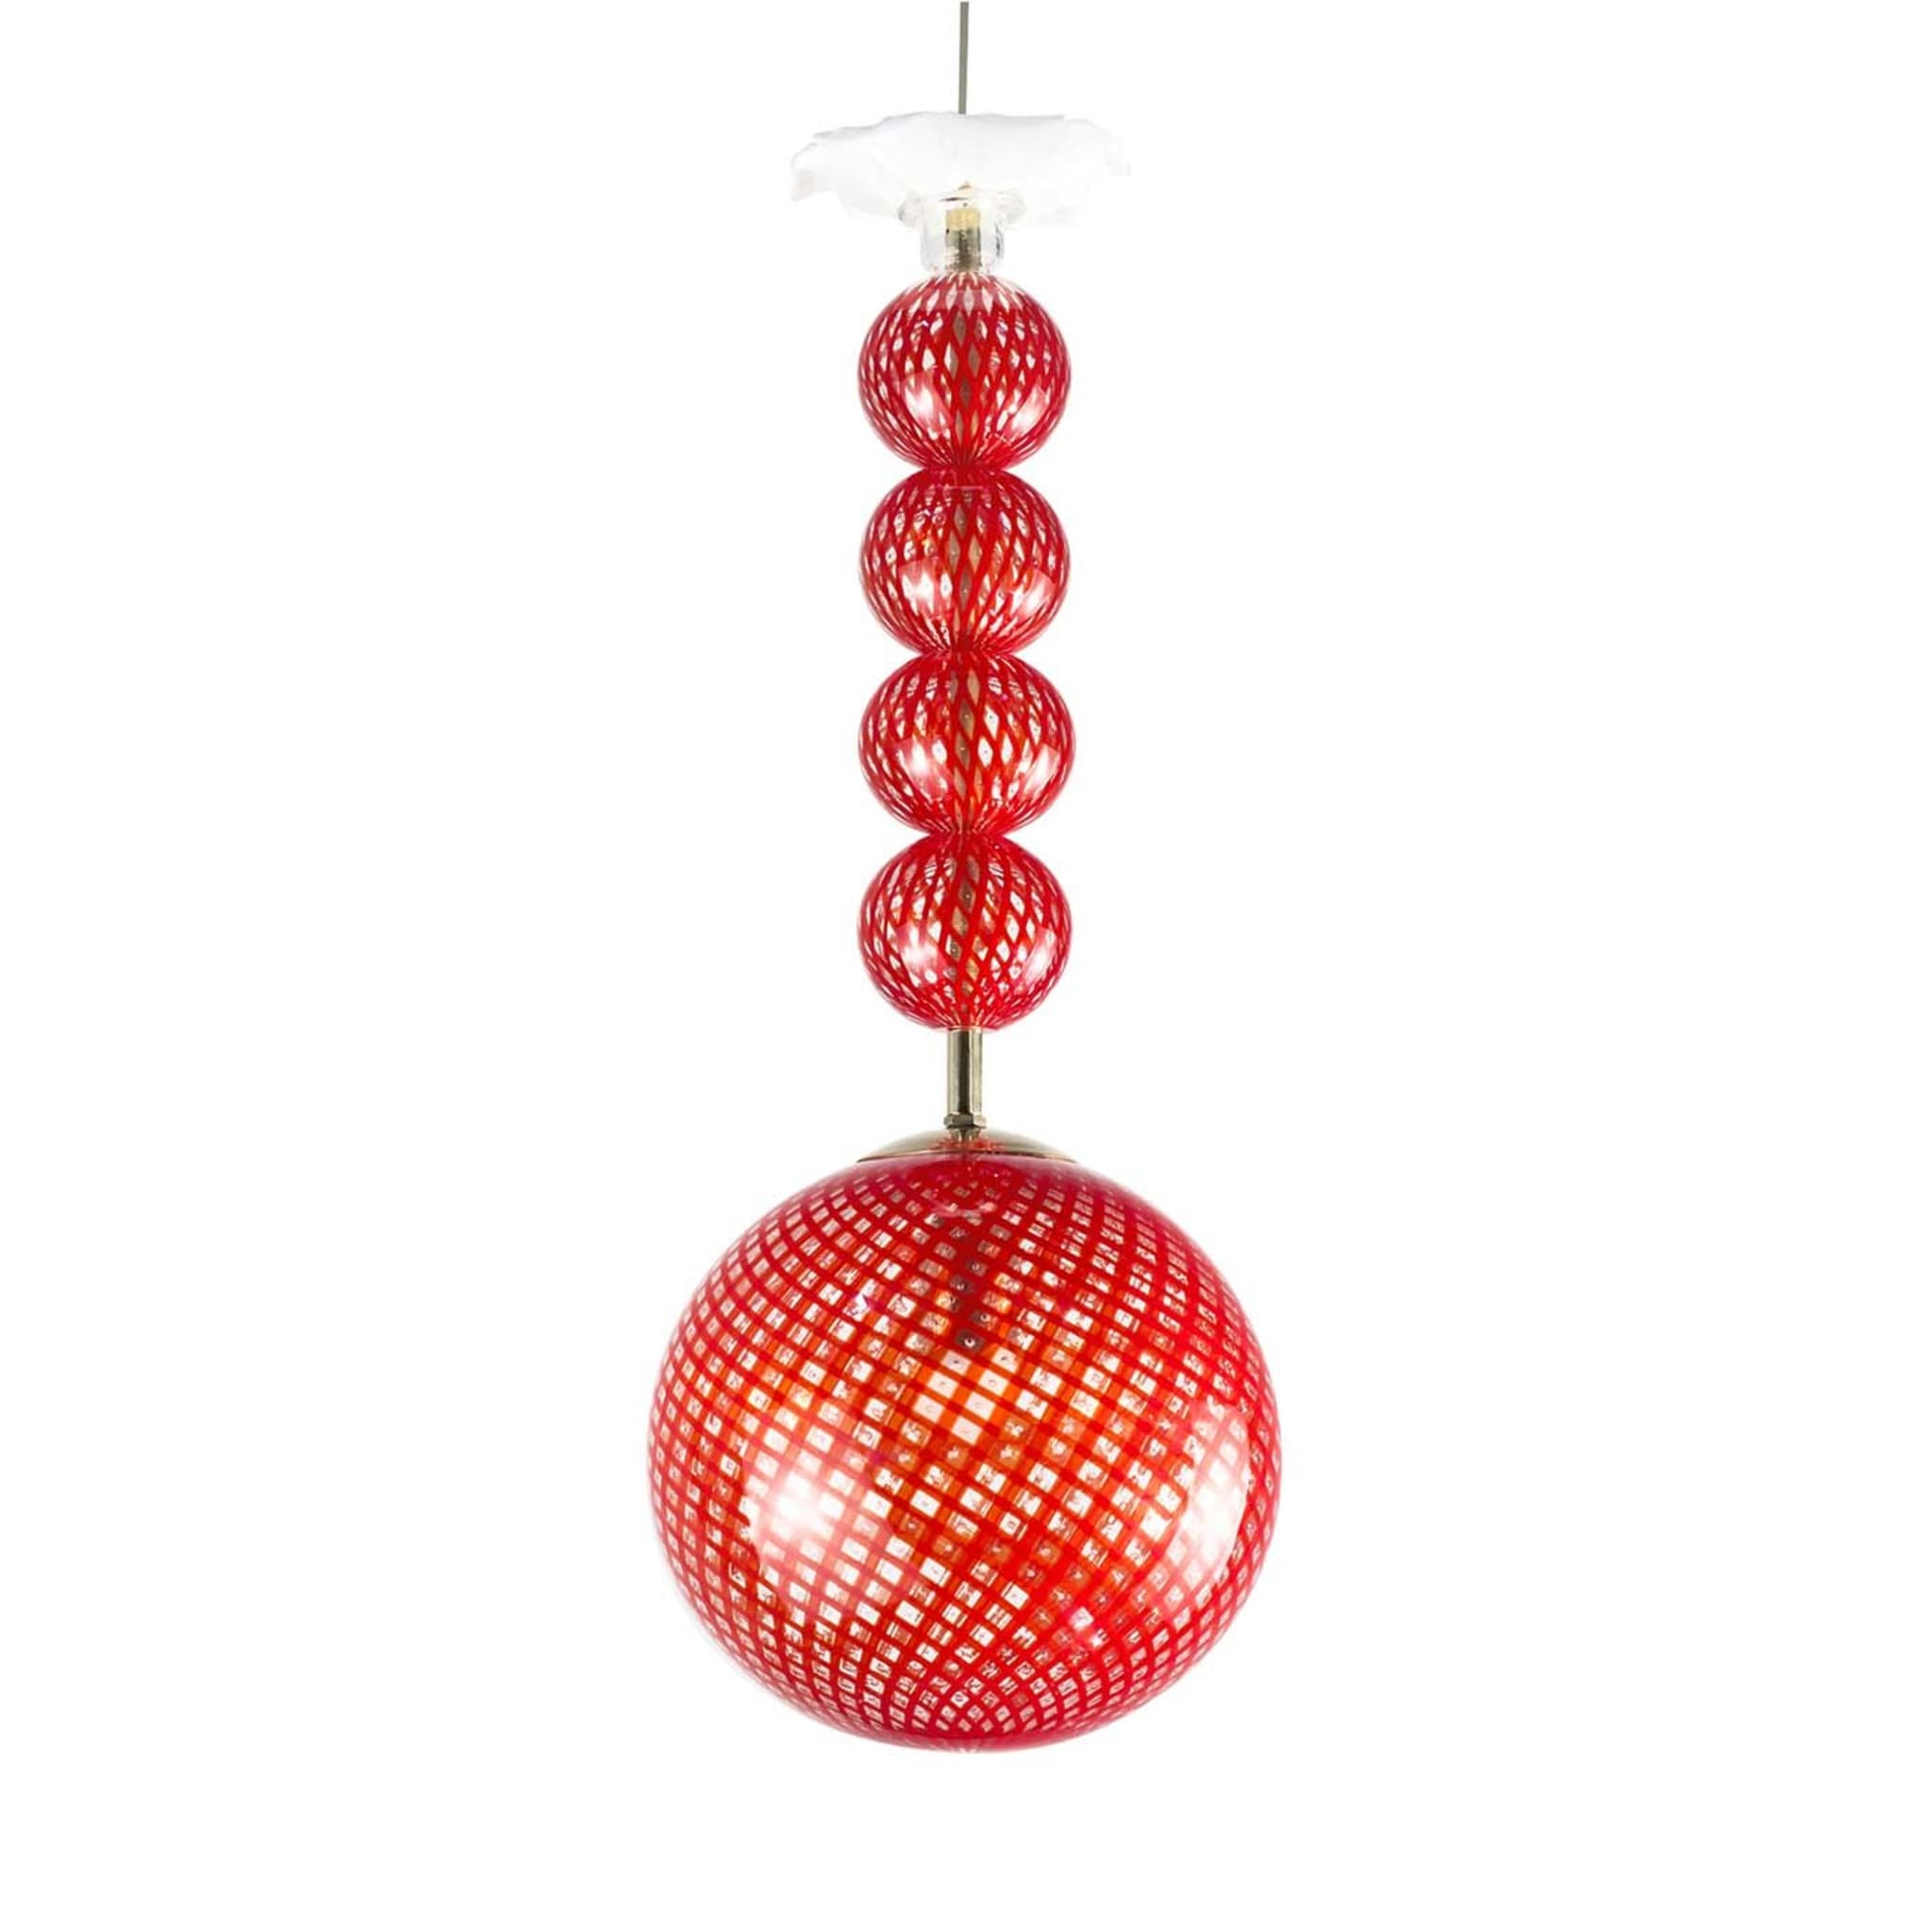 Reticelle Gooseberry Chandelier by Eliana Gerotto - Main view